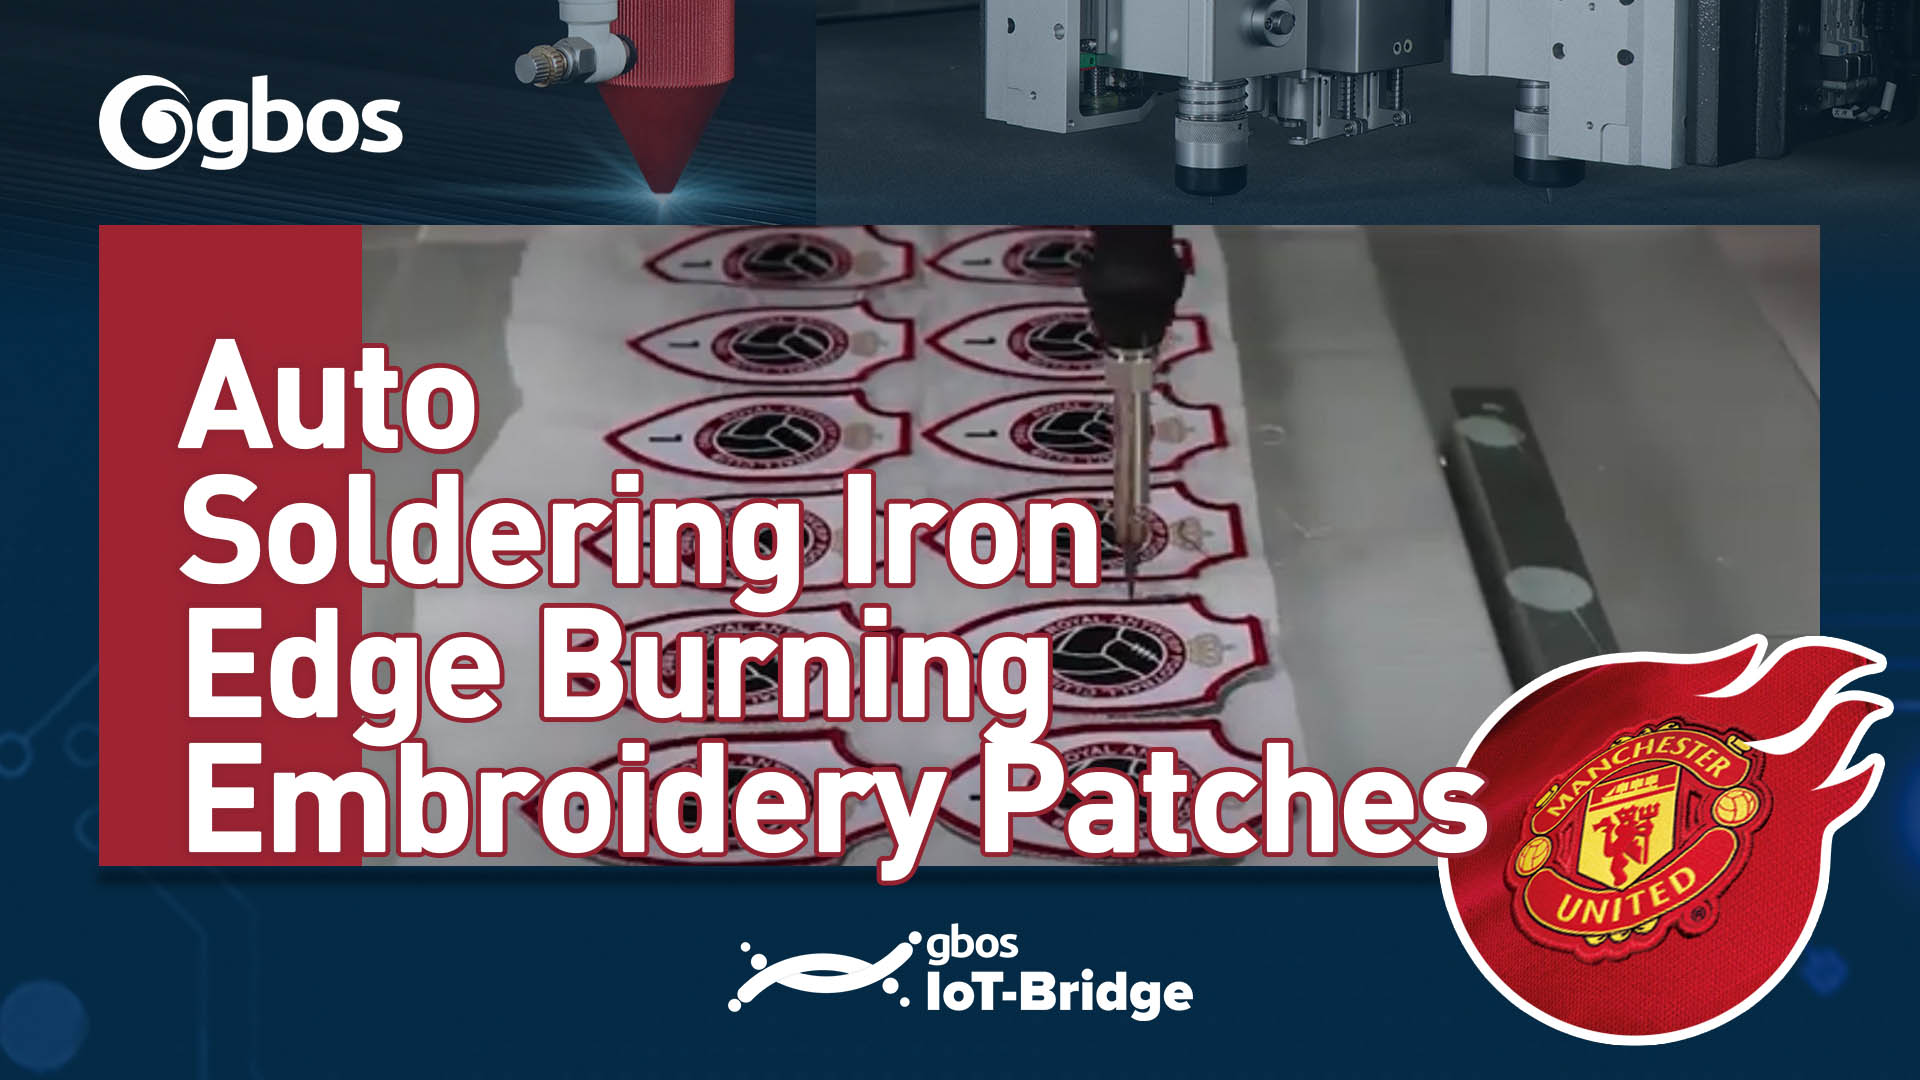 Auto Soldering Iron Edge Burning Embroidery Patches